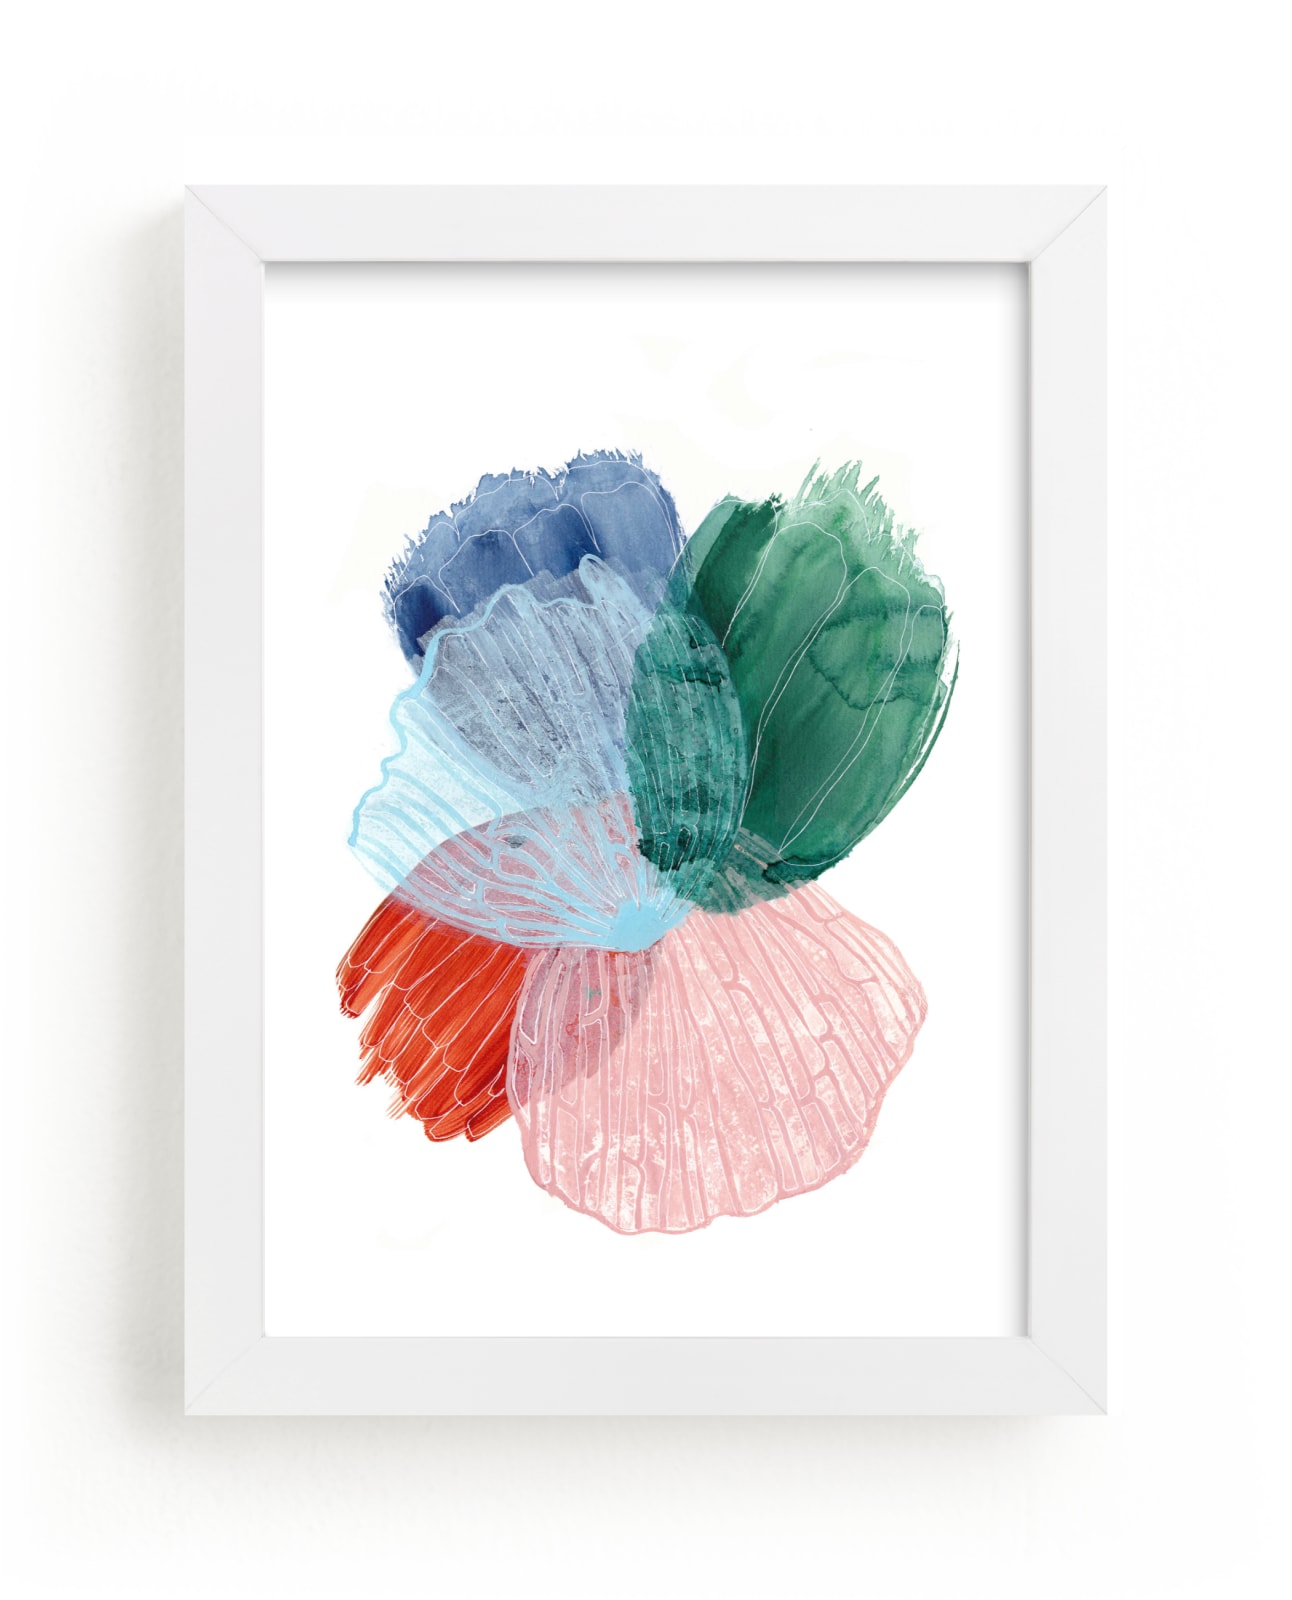 "Skeleton Petals 4" - Art Print by Maggie Ramirez Burns in beautiful frame options and a variety of sizes.